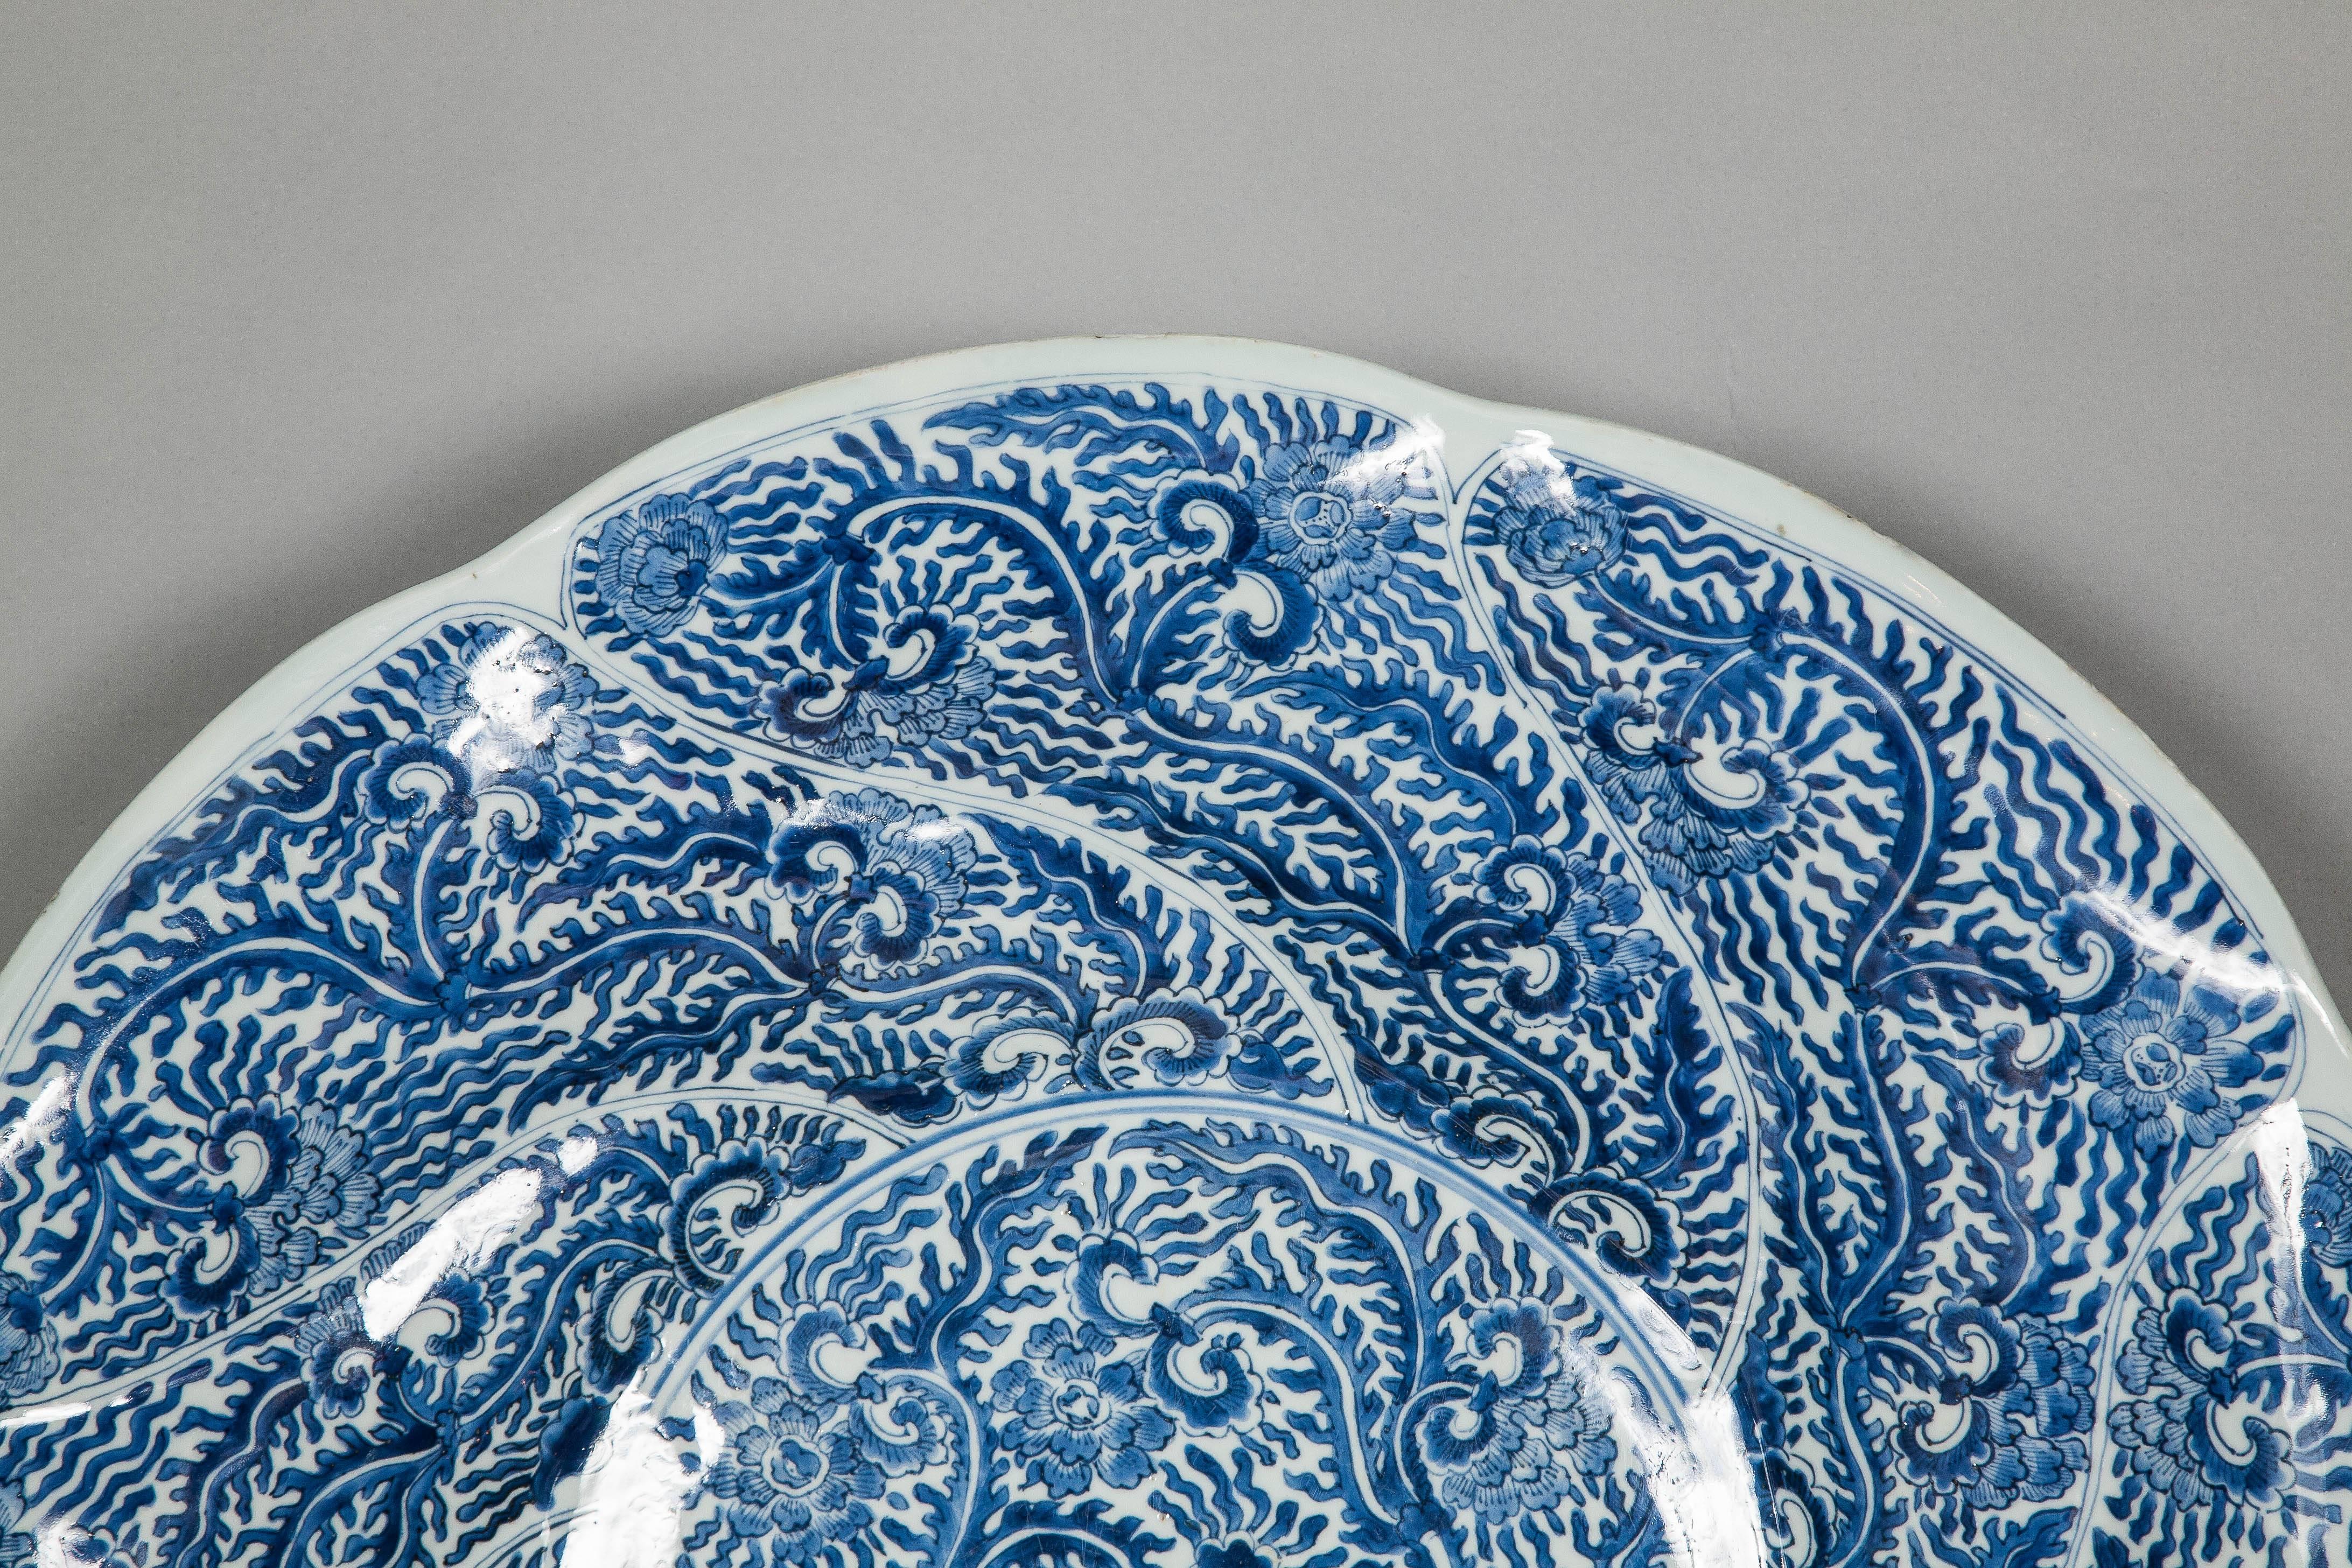 A rare, oversized, possibly unrecorded,pair of Chinese Kangxi Dynasty (1662-1722) Blue and White chargers dating from around 1700 and made for the foreign markets (export) most probably for the Dutch since the shape recalls one of 17th century